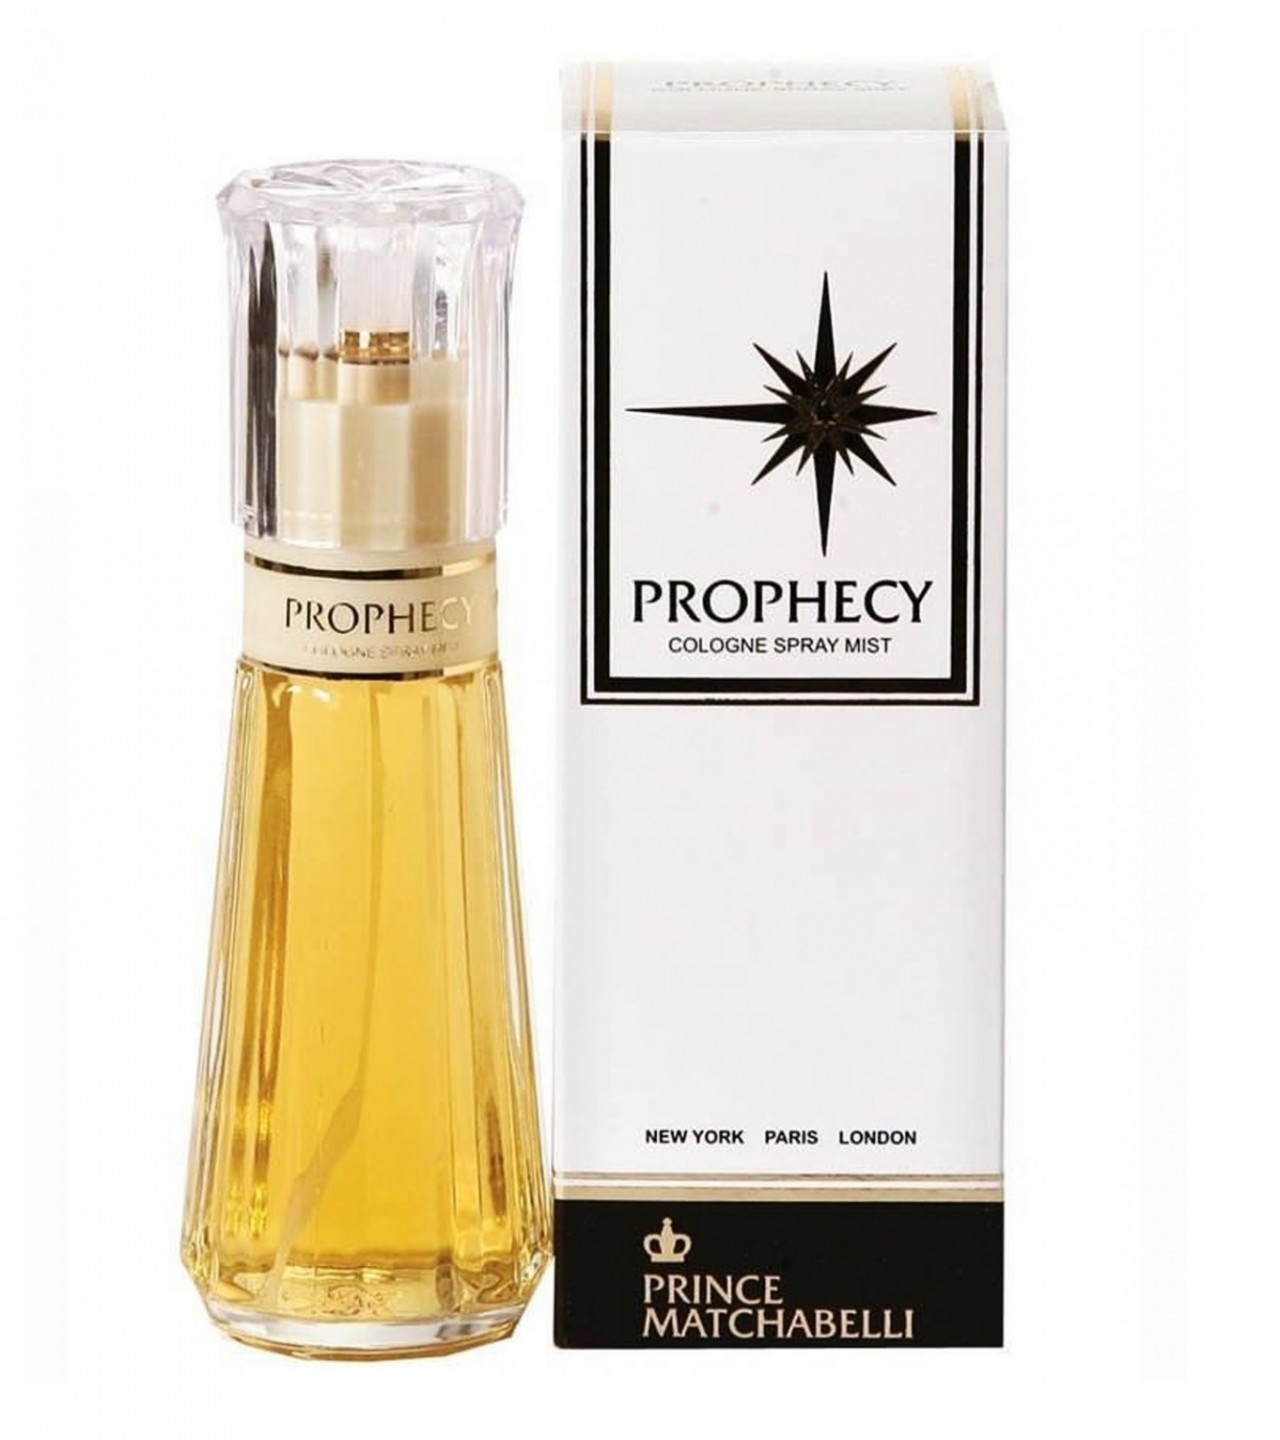 Prince Matchabelli Prophecy Perfume For Women – Cologne Spray Mist – 100 ml